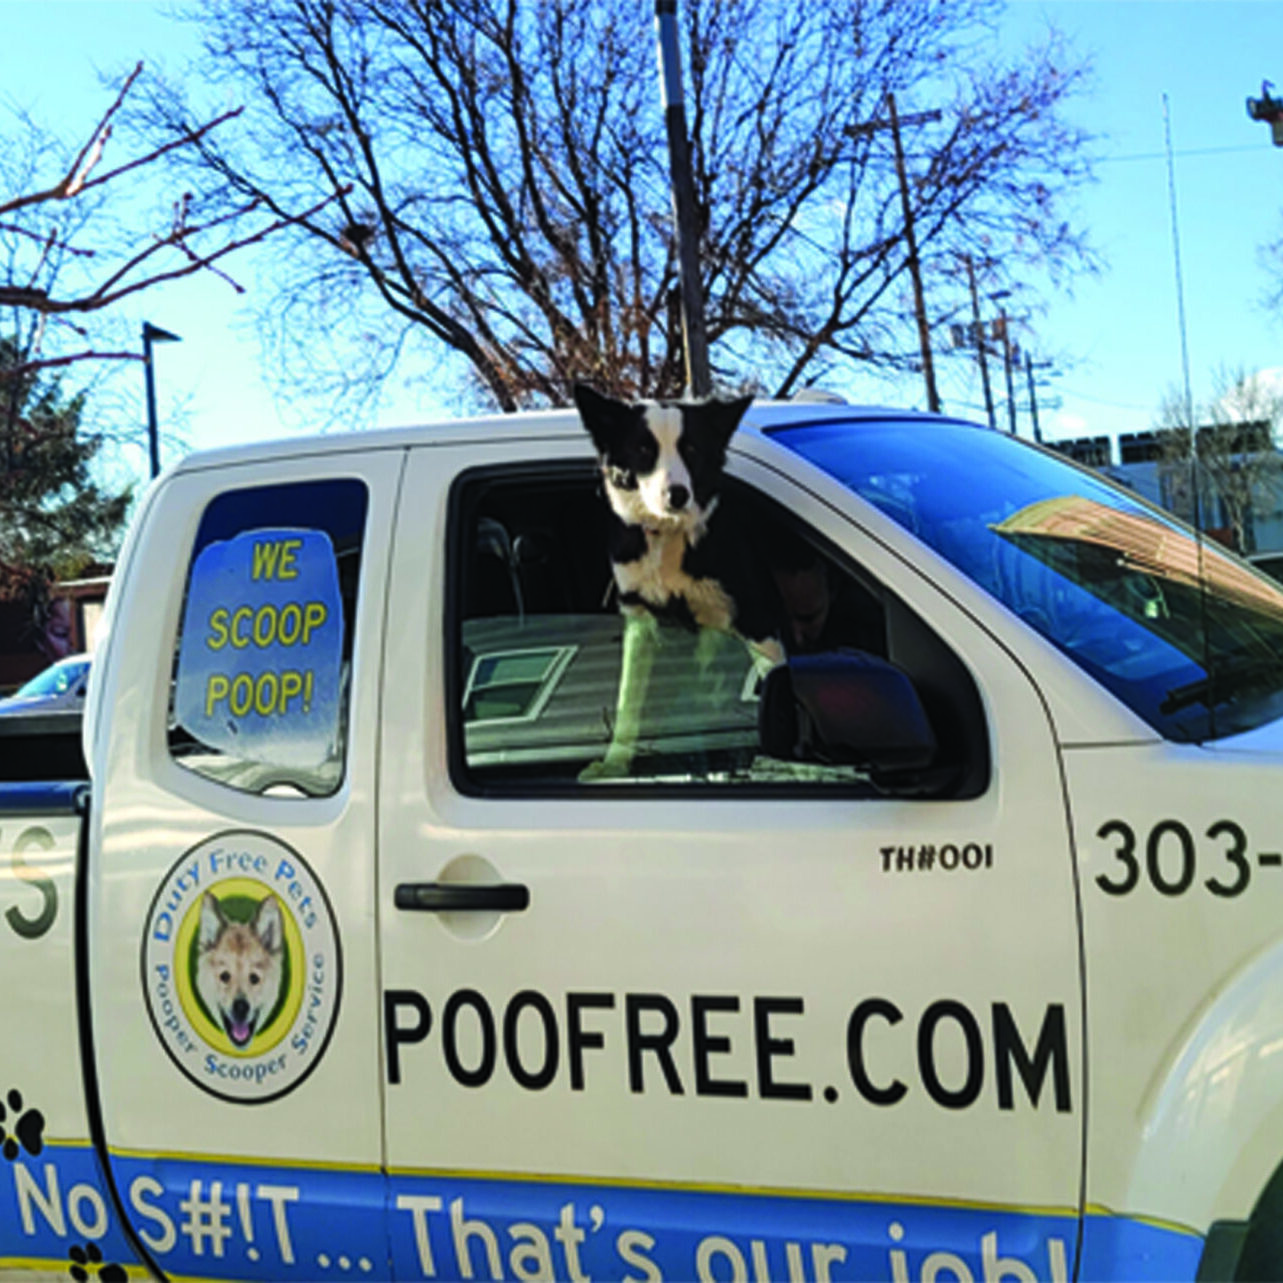 A 'Pooper Scooper' truck with a 'Duty-Free Pets' logo picking up dog poop in Broomfield, Colorado. Specialized equipment is visible for efficient waste removal.